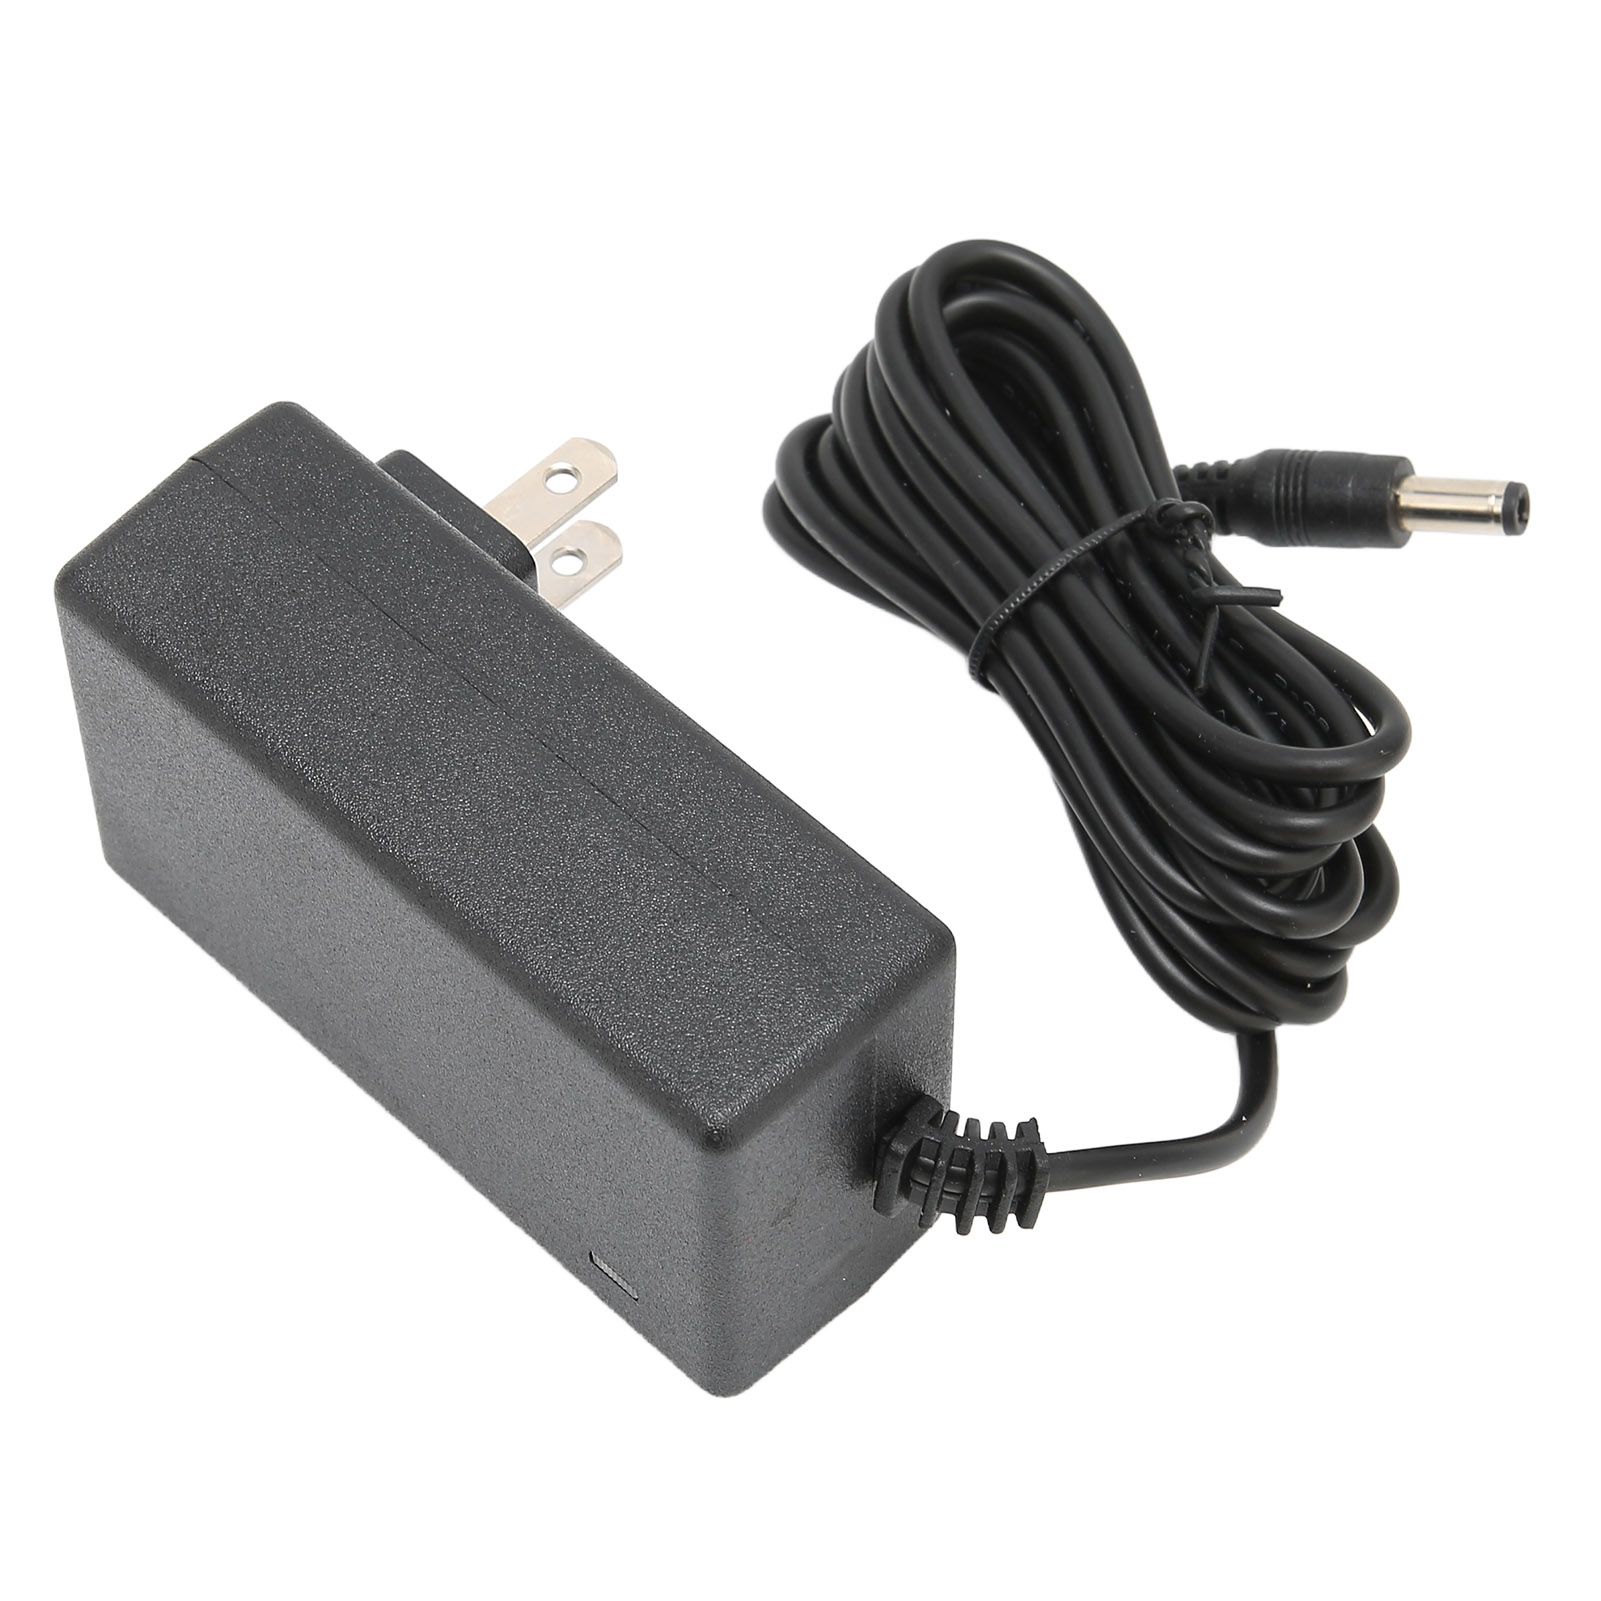 High Speed 26.1V Vacuum Cleaner Charger Power Supply Adapter For V6 V7 V8 Series High Speed 26.1V Vacuum Cleaner Charg - Click Image to Close